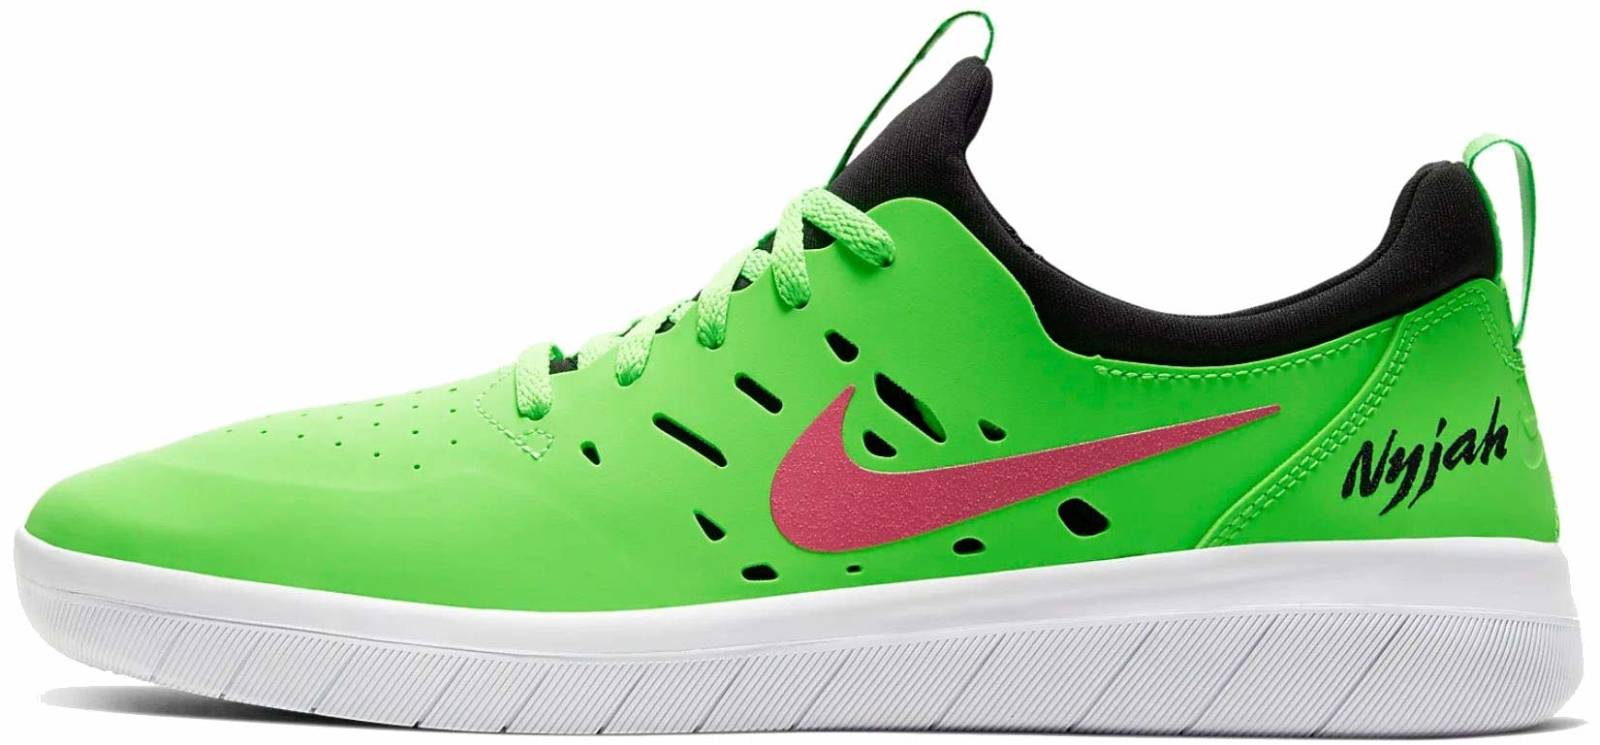 Green Watermelon Rind Womans Skateboard Casual Shoes New Basketball Shoes 